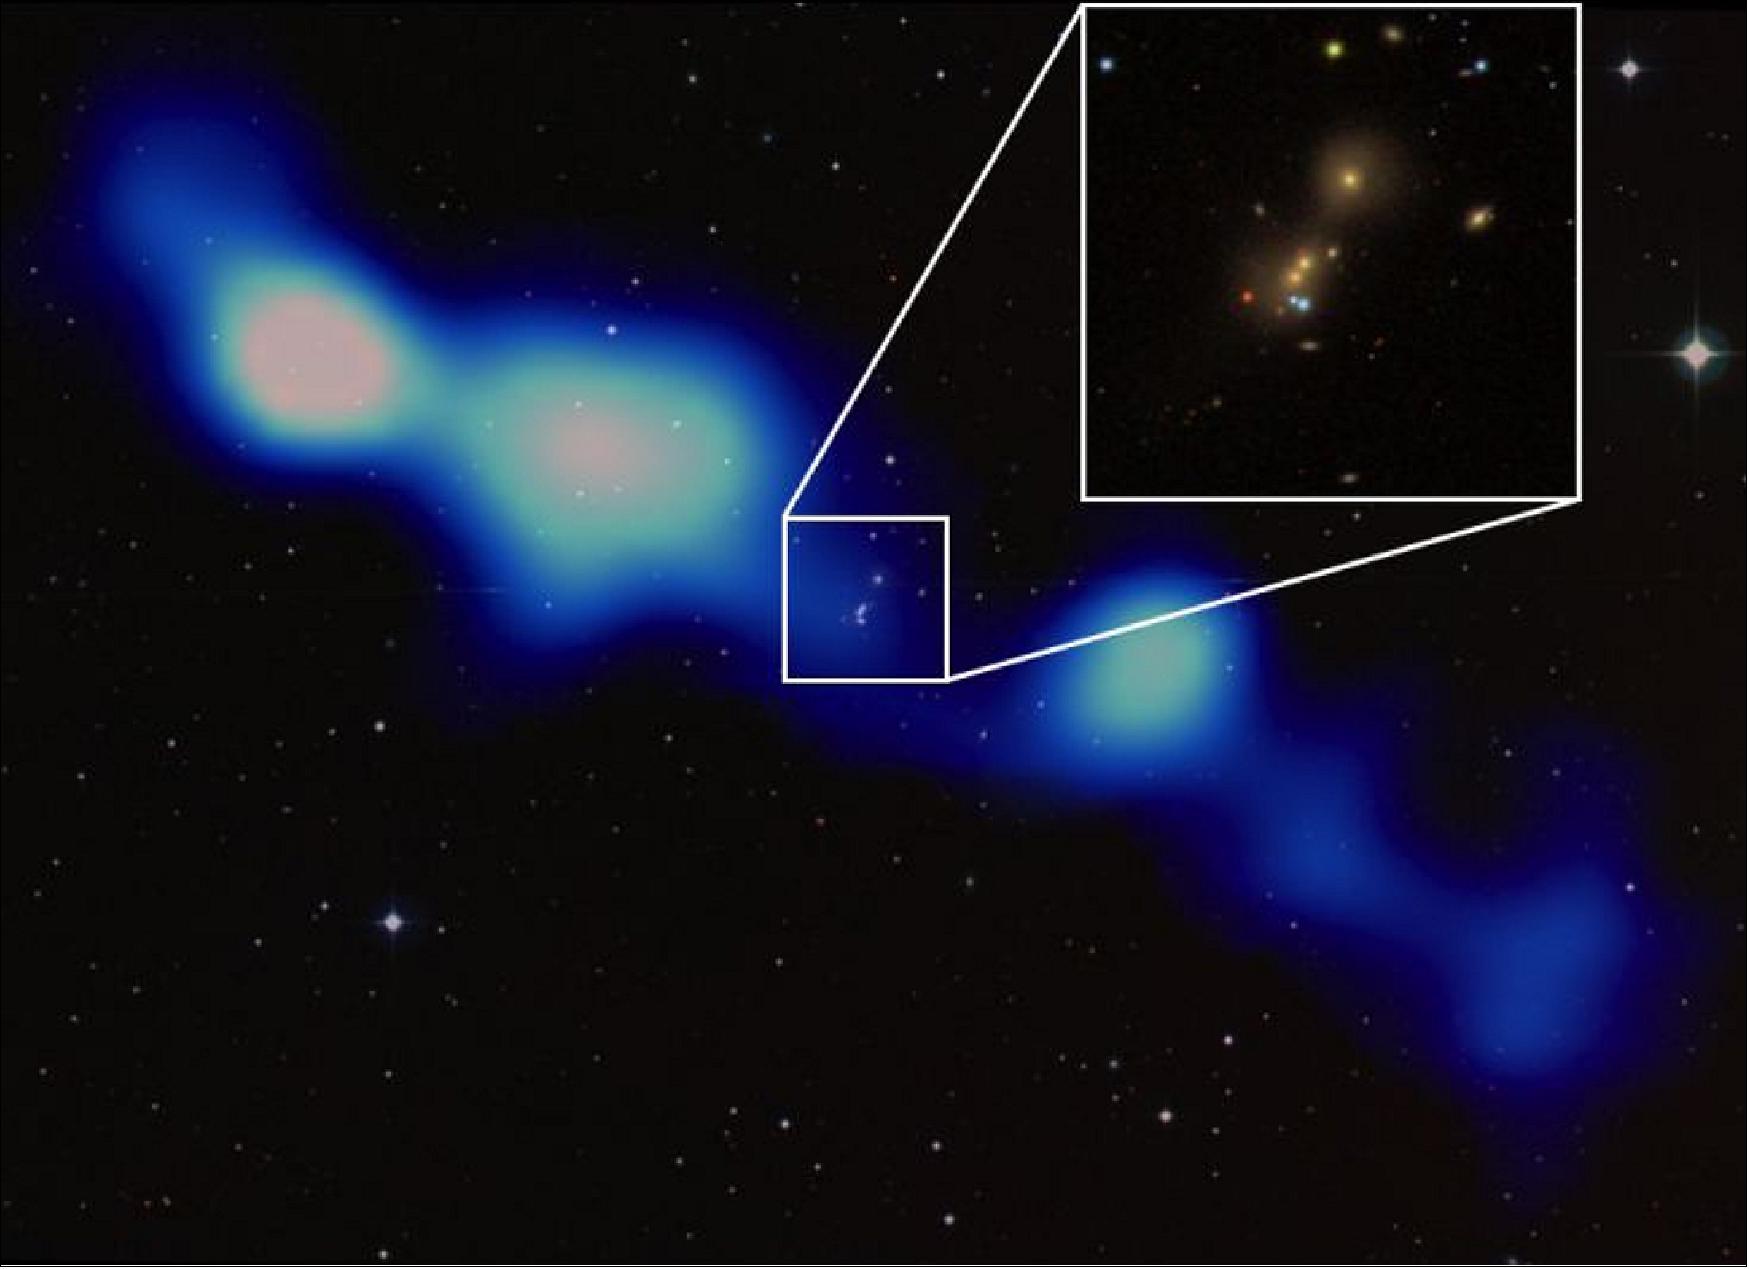 Figure 23: LOFAR discovers new giant galaxy in all-sky survey. Overlay of the new GRG (blue-white colors) on an optical image from the Digitized Sky survey. The inset shows the central galaxy triplet (image from Sloan Digital Sky Survey). The image is about 2 Mpc (Megaparsec) across (image credit: ASTRON)